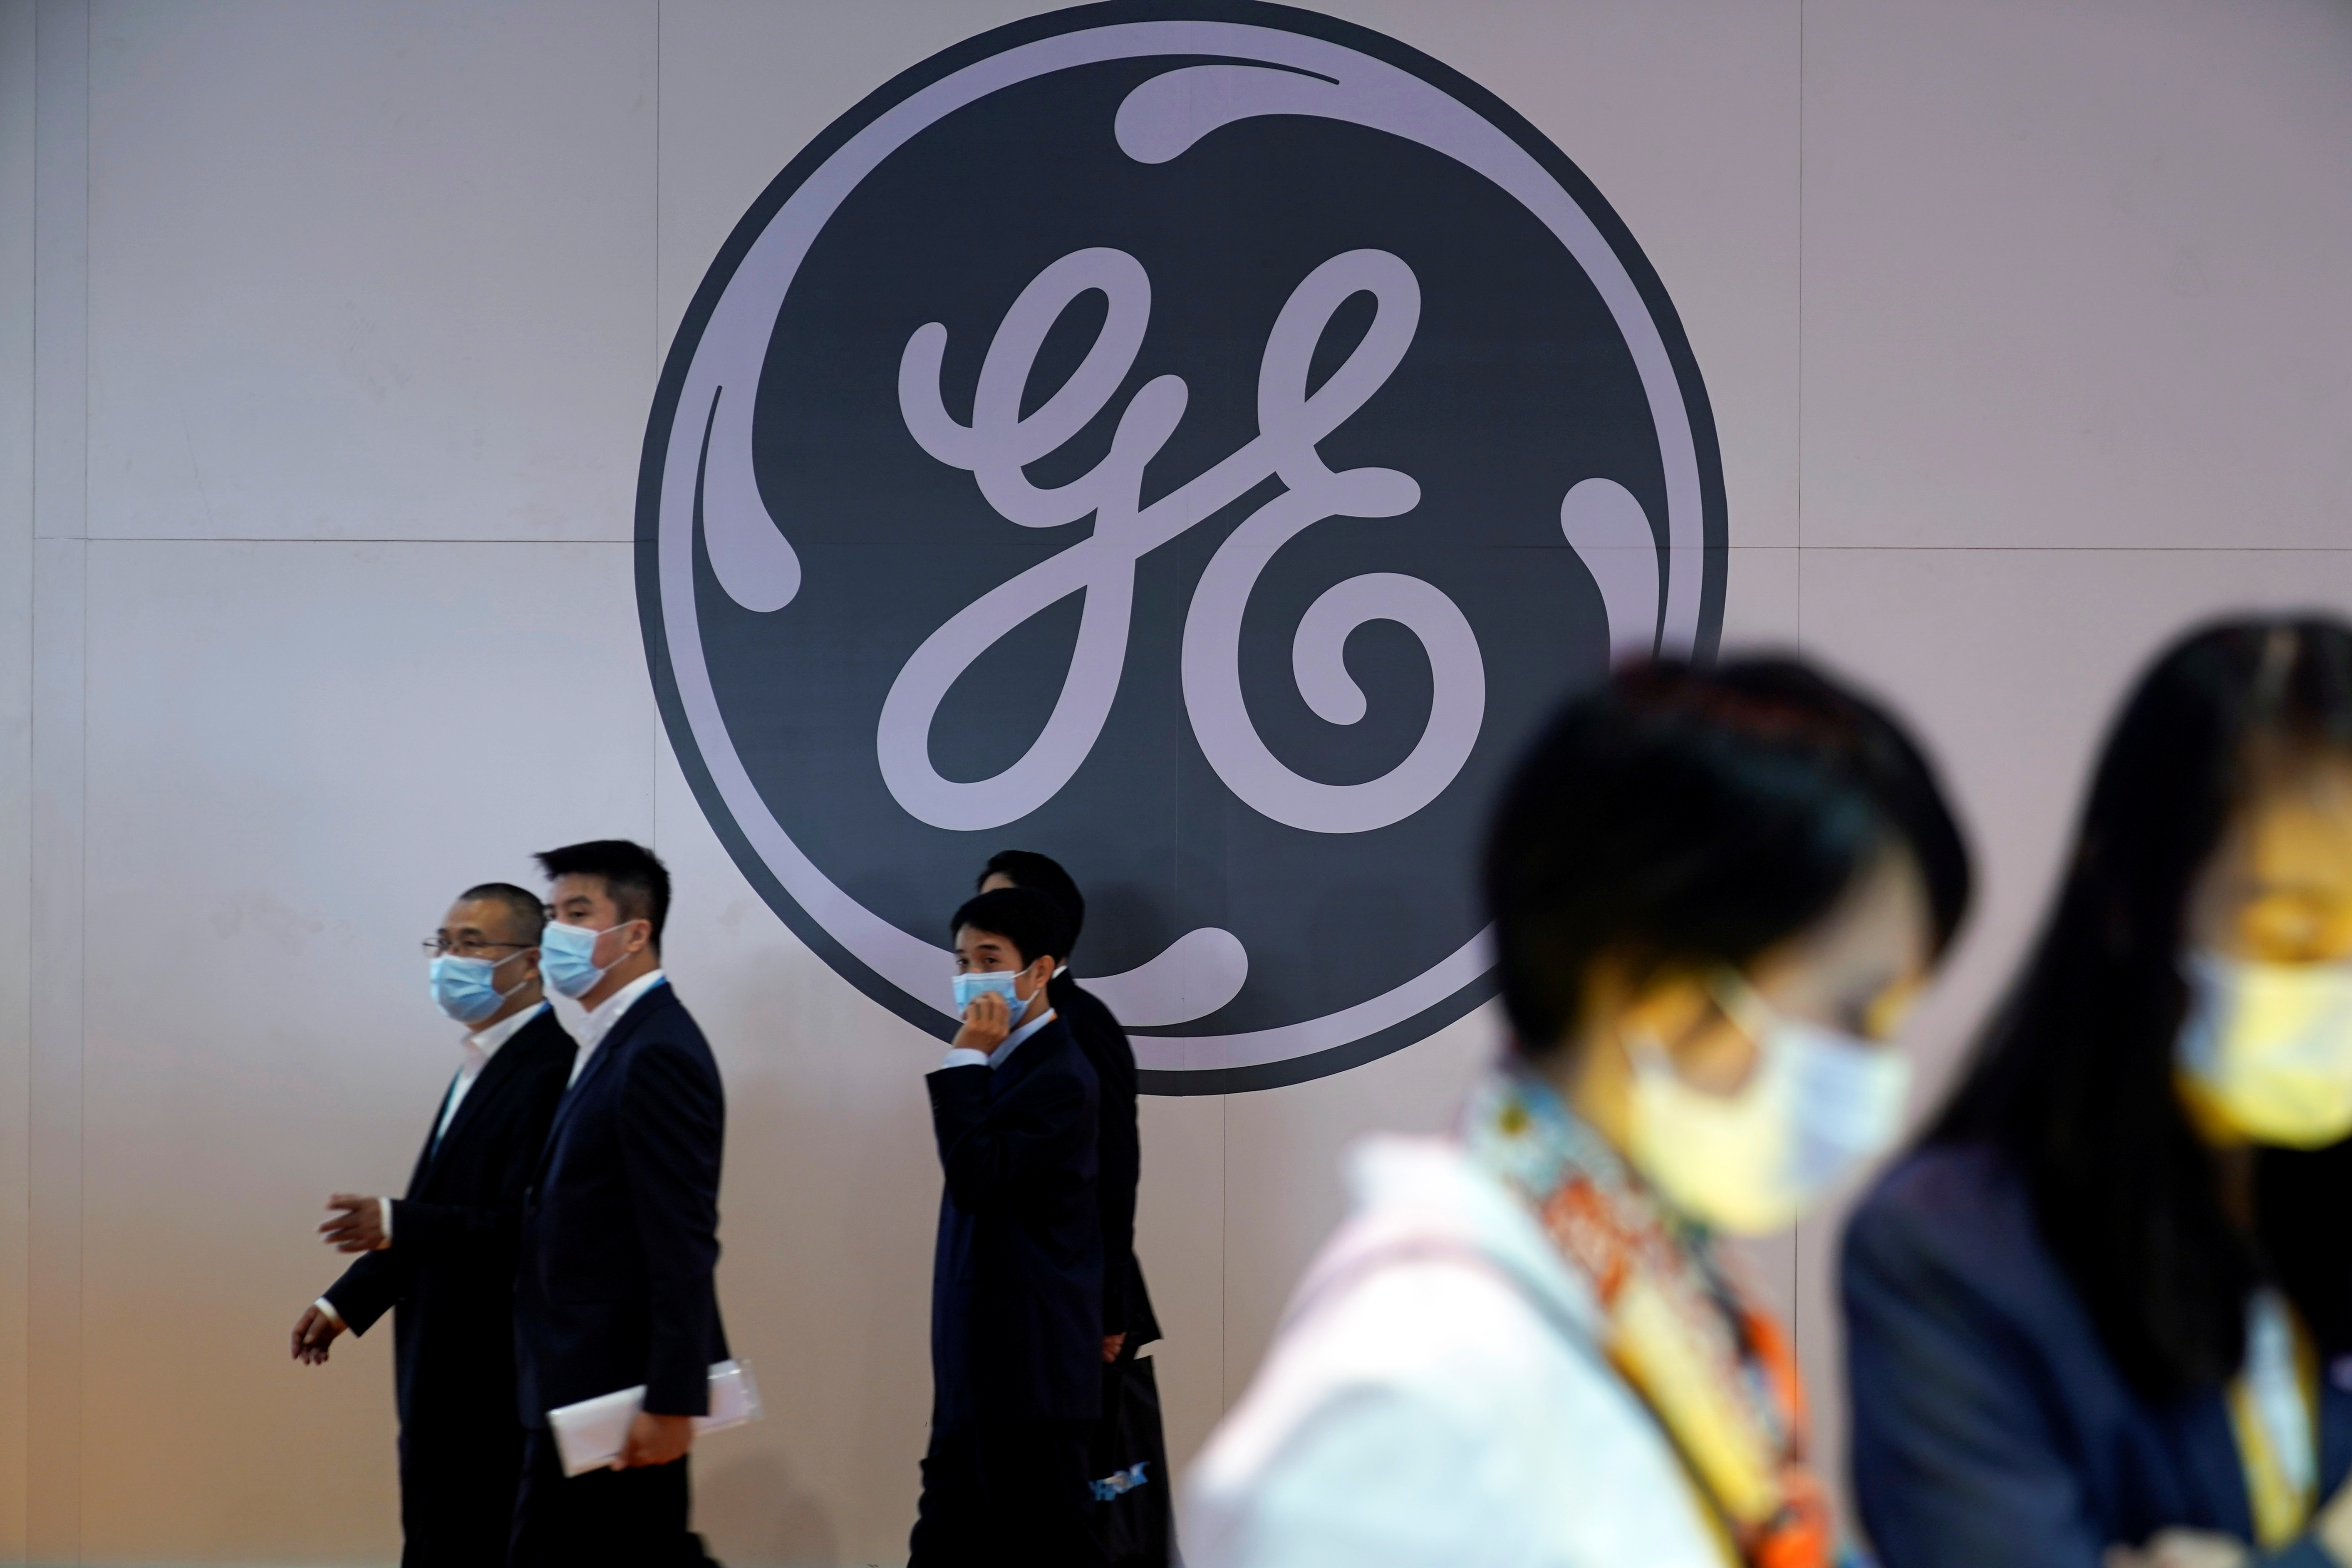 A General Electric (GE) sign is seen at the third China International Import Expo (CIIE) in Shanghai